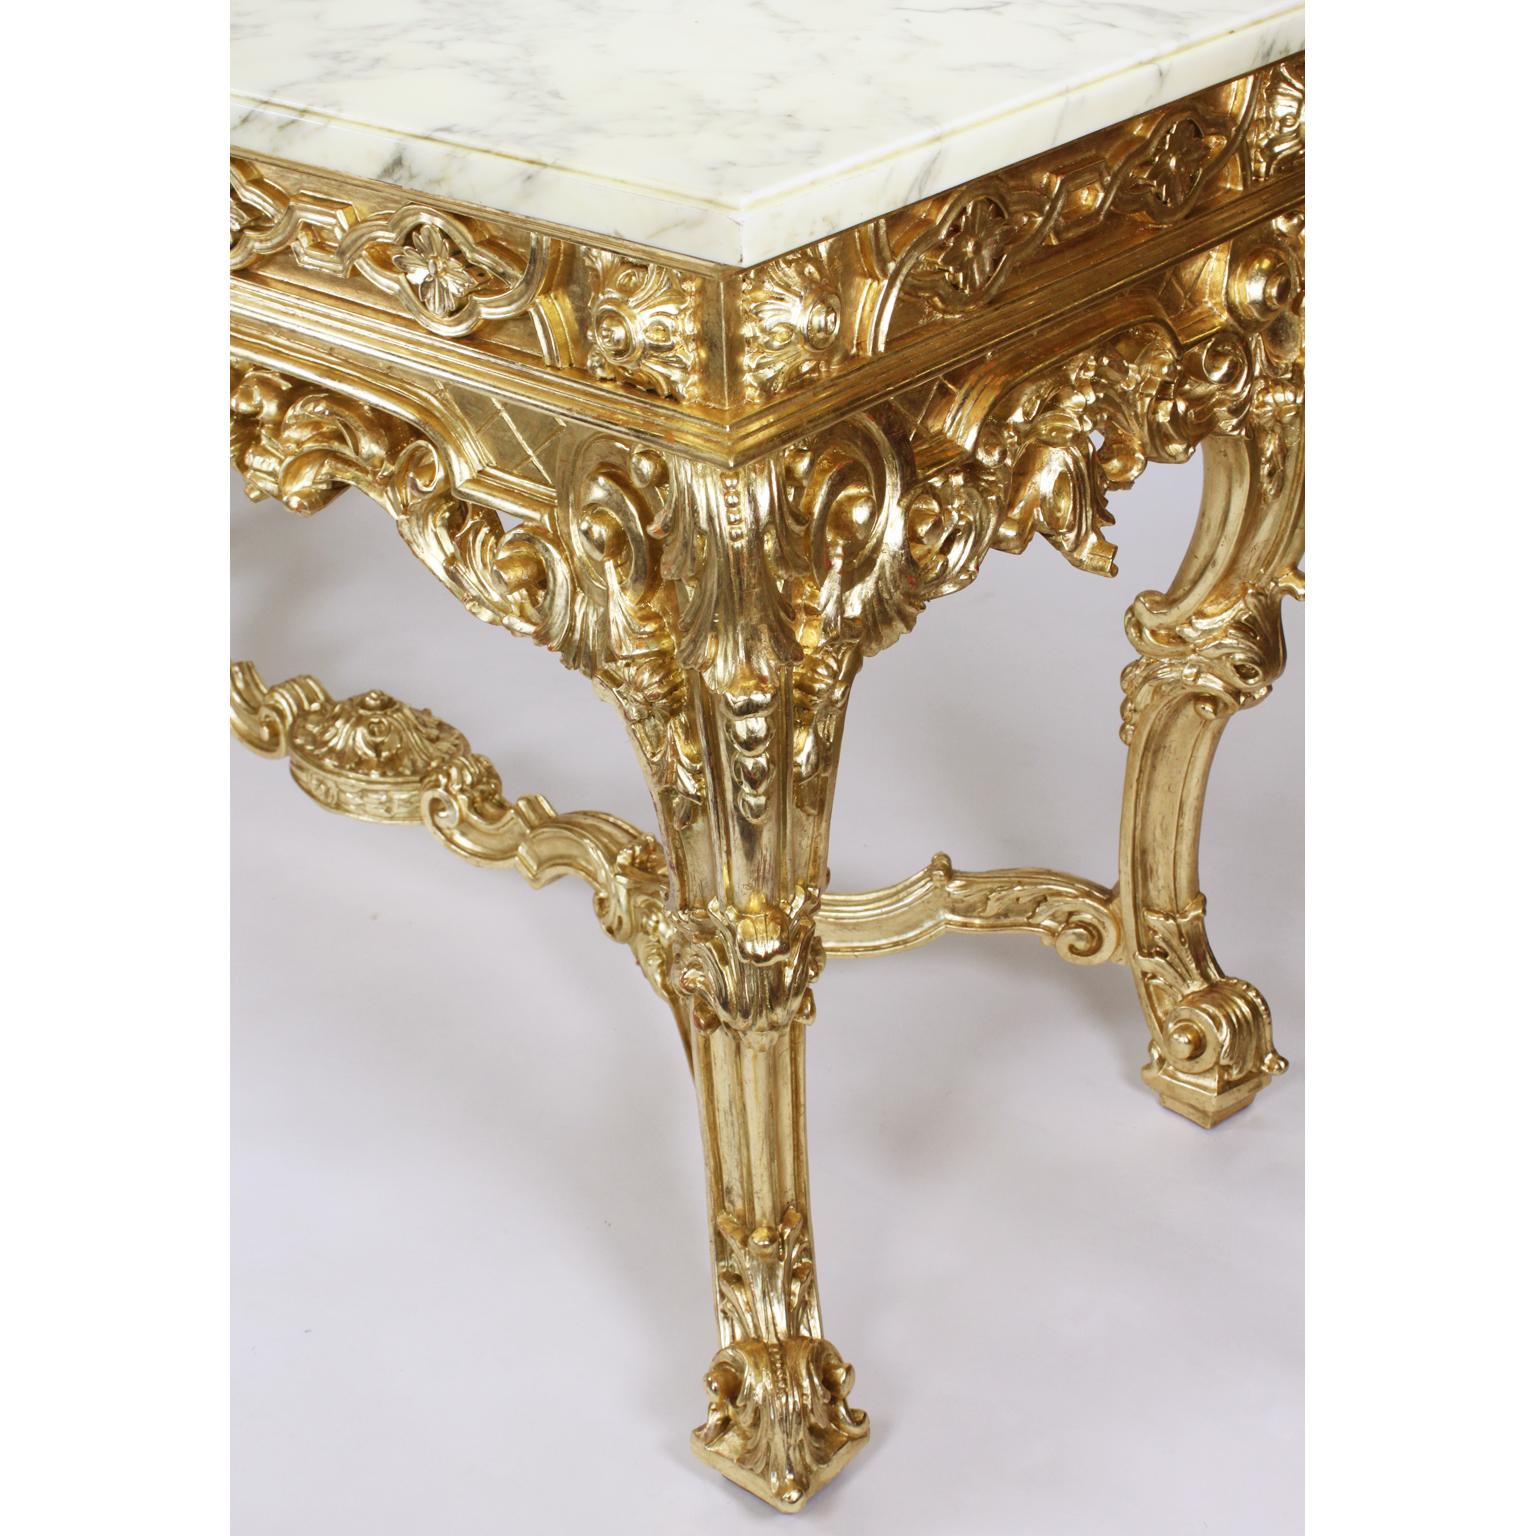 English George II Style Giltwood Carved Console Table with Marble Top For Sale 2